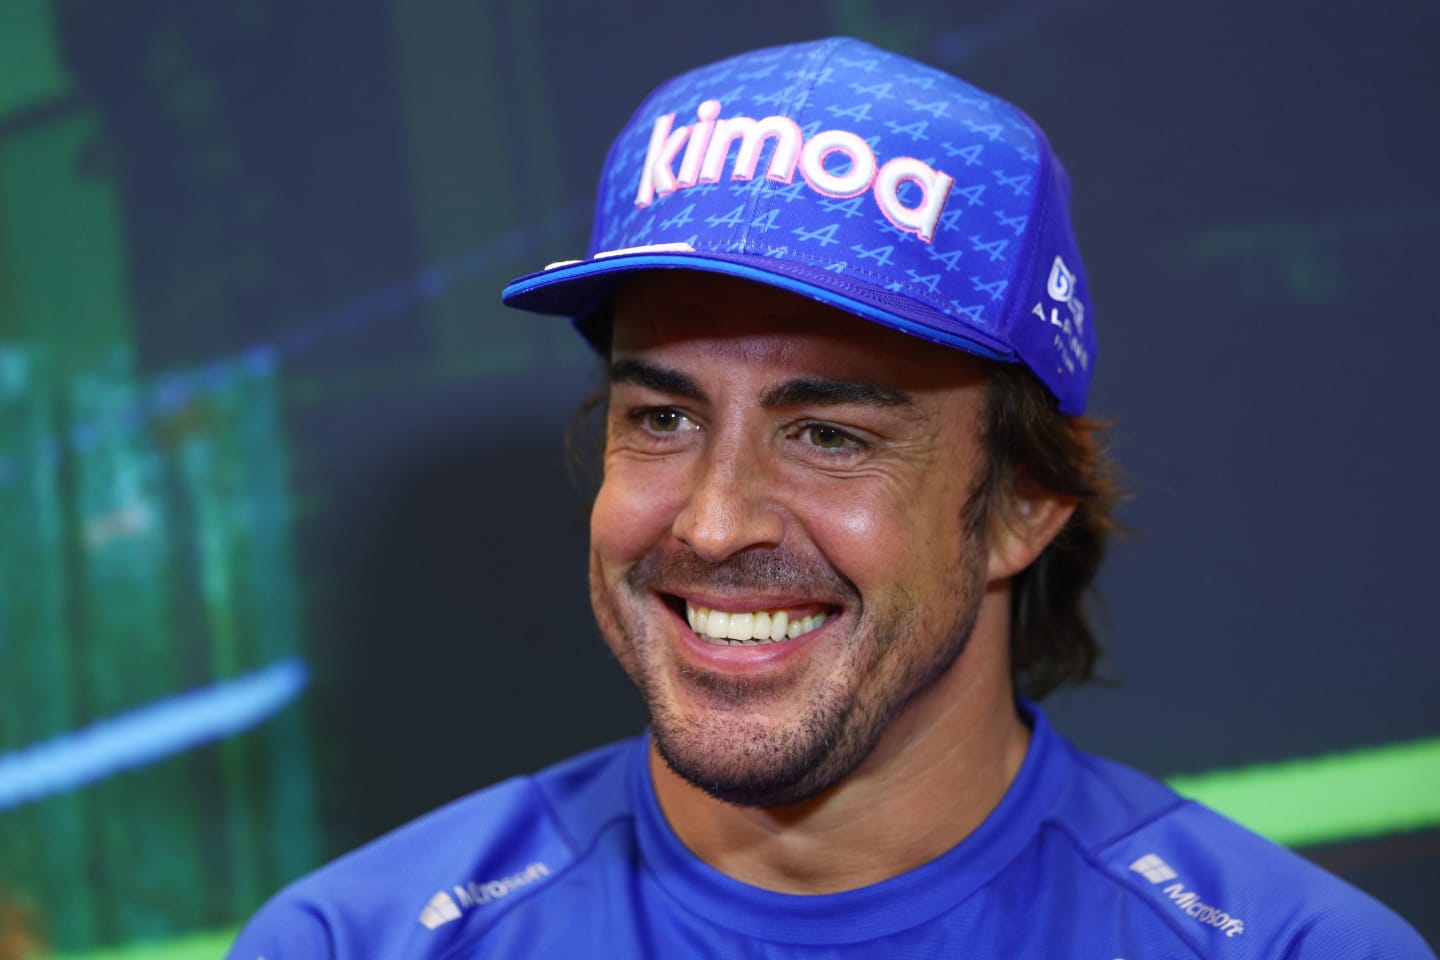 BAKU, AZERBAIJAN - JUNE 10: Fernando Alonso of Spain and Alpine F1 laughs in the Drivers Press Conference prior to practice ahead of the F1 Grand Prix of Azerbaijan at Baku City Circuit on June 10, 2022 in Baku, Azerbaijan. (Photo by Clive Rose/Getty Images)